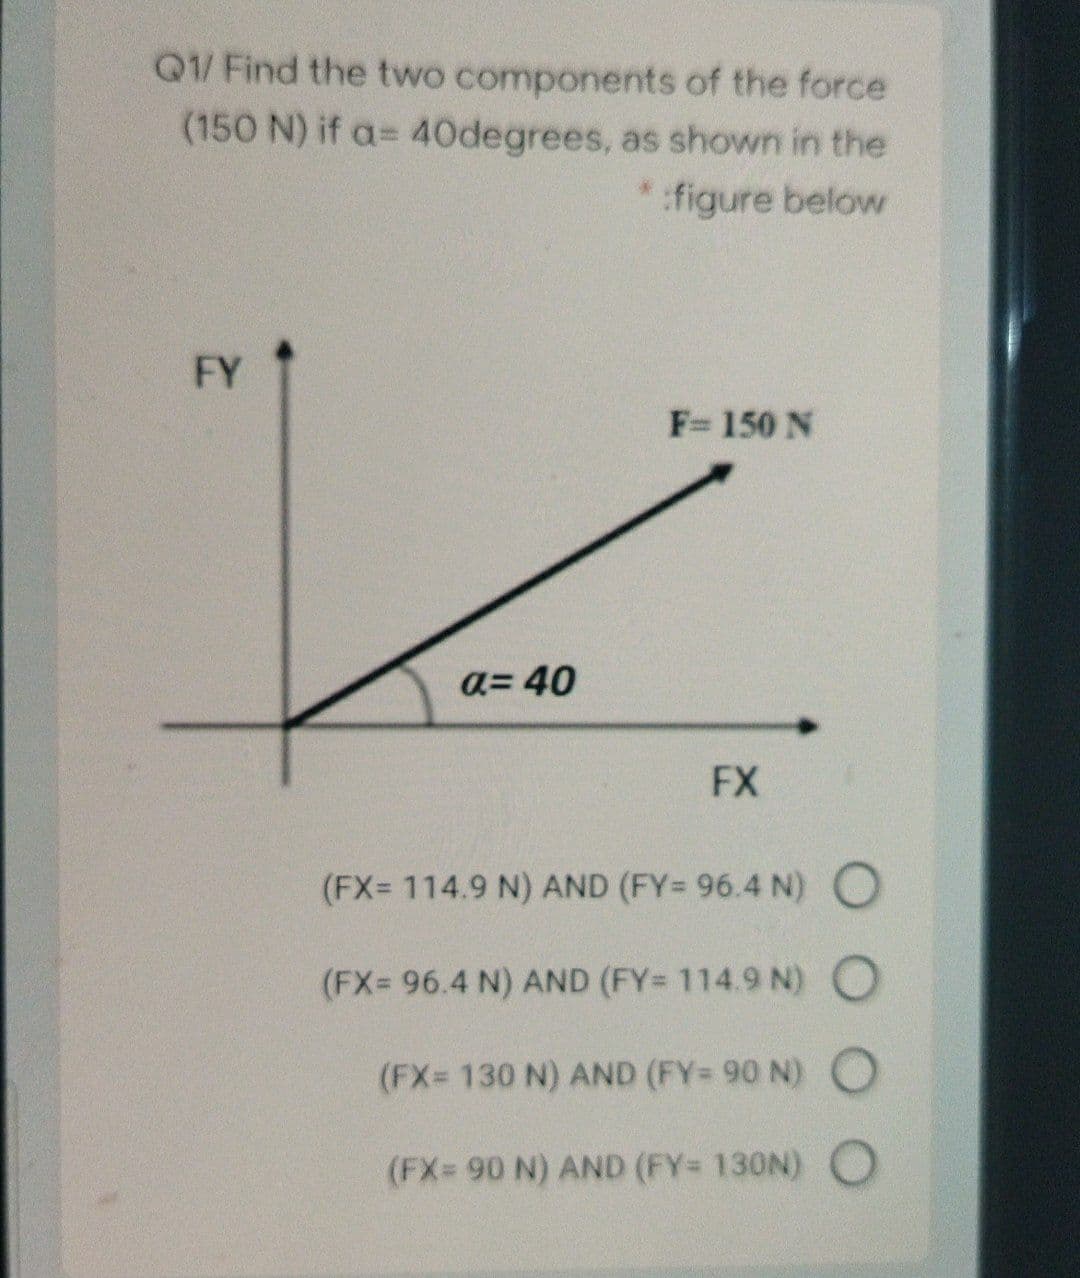 Q1/ Find the two components of the force
(150 N) if a= 40degrees, as shown in the
figure below
FY
F= 150 N
a= 40
FX
(FX= 114.9 N) AND (FY= 96.4 N) O
(FX= 96.4 N) AND (FY= 114.9 N) O
(FX= 130 N) AND (FY= 90 N) O
(FX= 90 N) AND (FY= 130N) O
